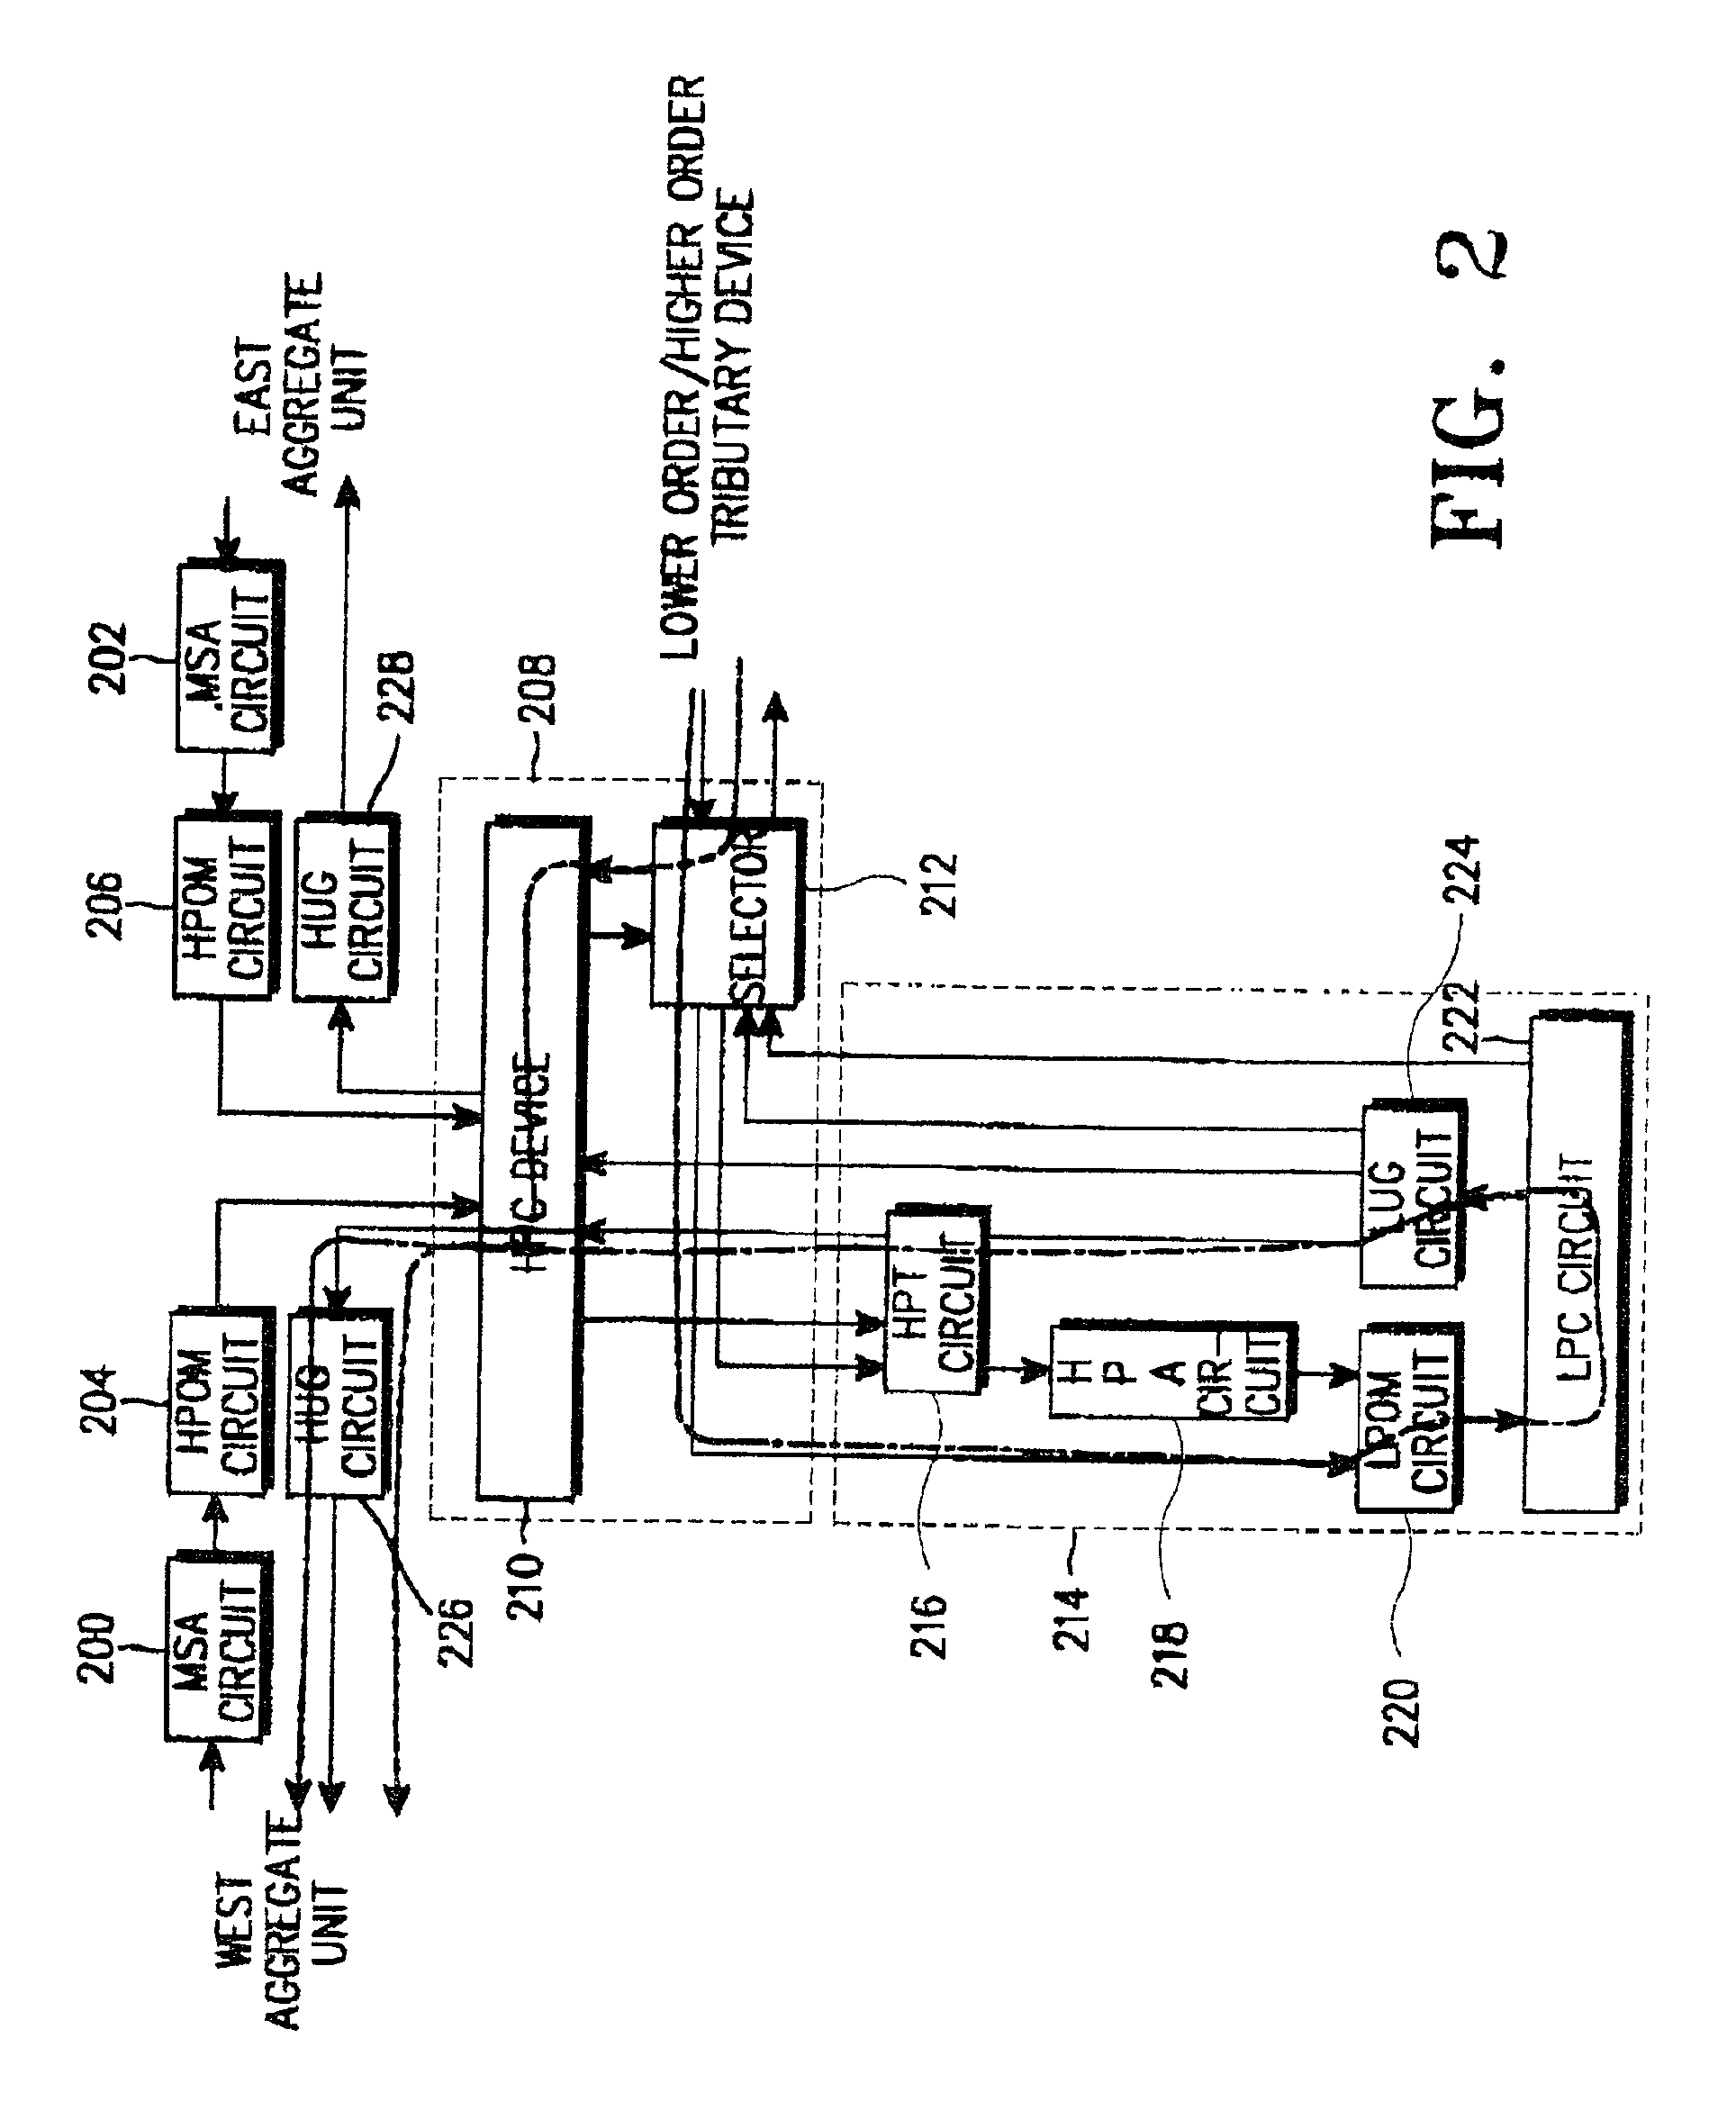 Add/drop cross connection apparatus for synchronous digital hierarchy